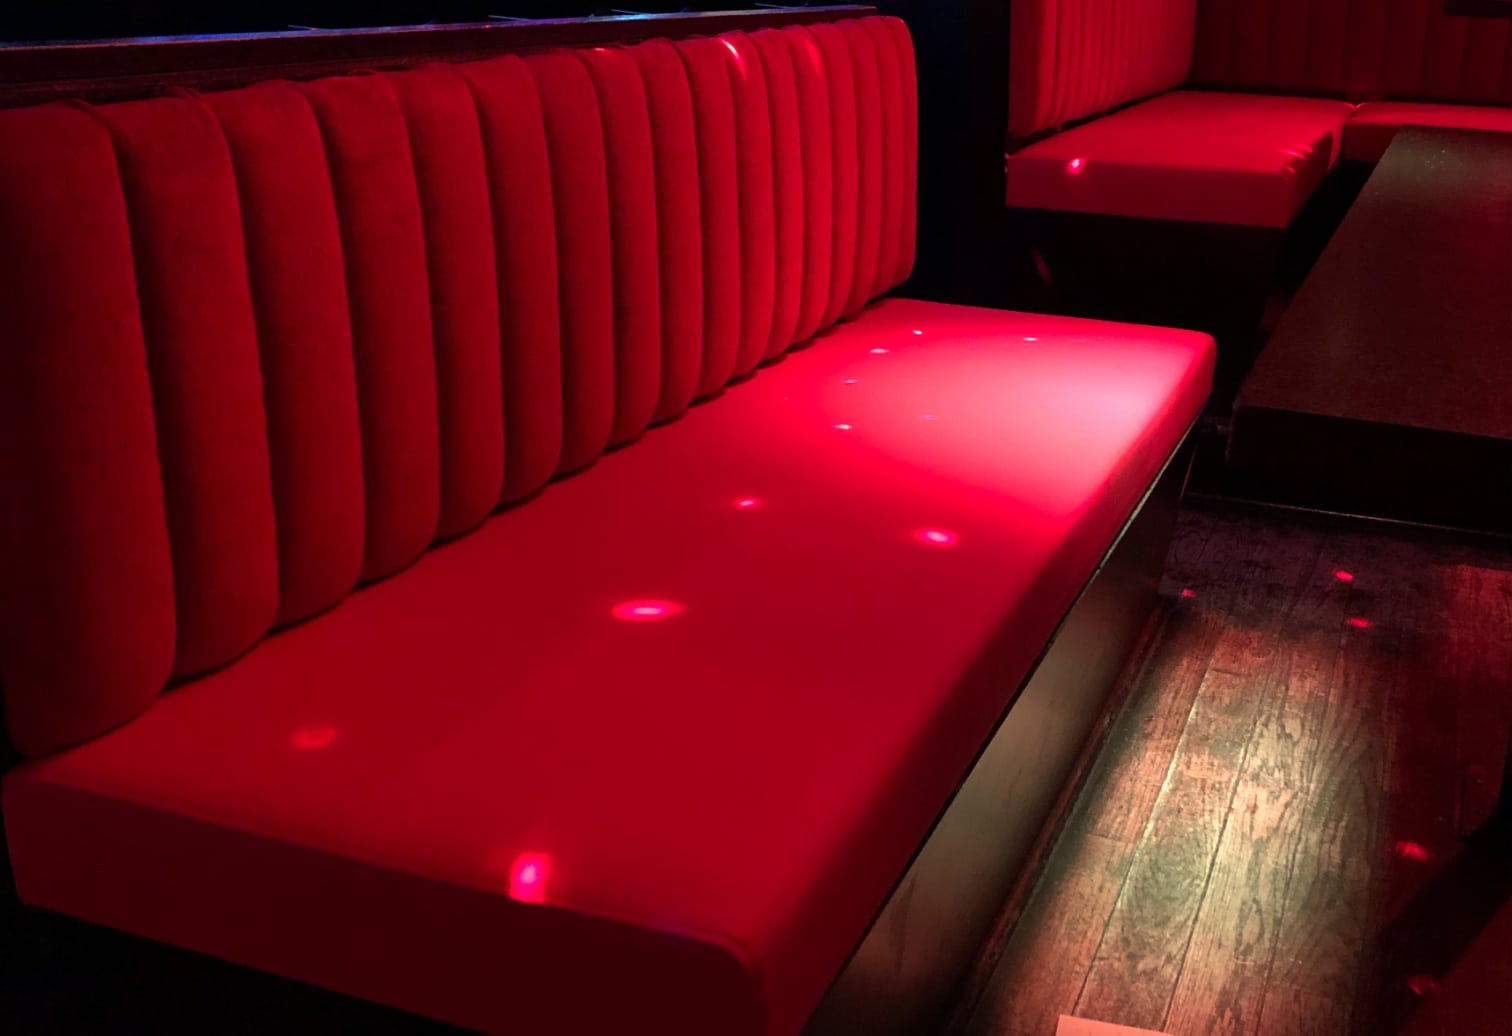 bar bench banquet red vinyle seat red channels